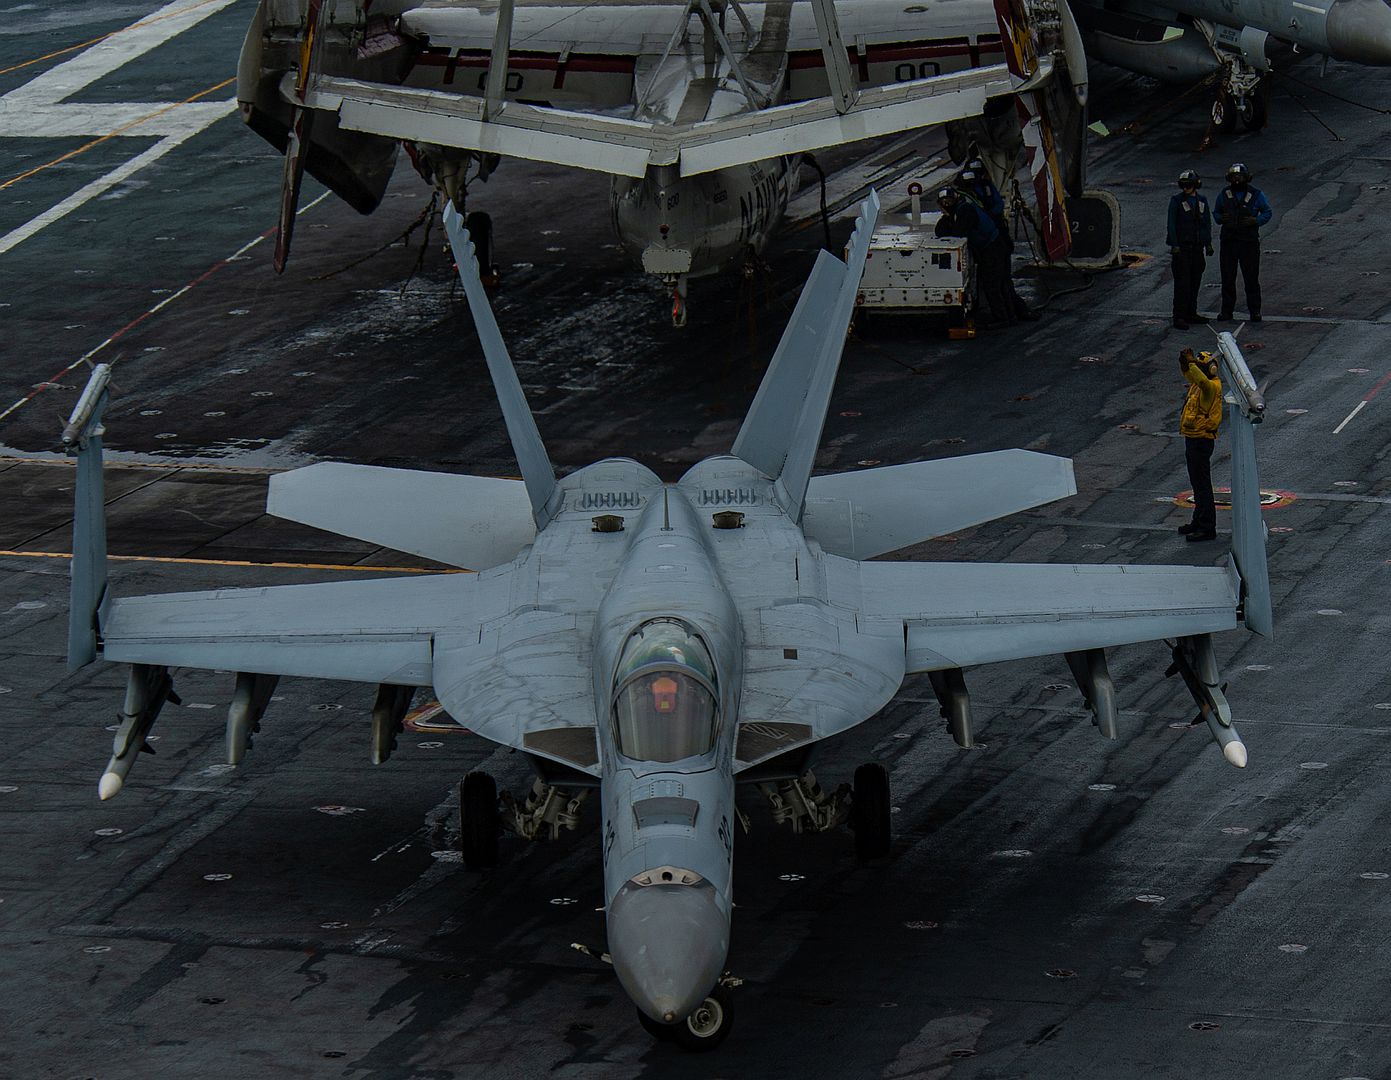 18E Super Hornet From The Kestrels Of Strike Fighter Squadron 137 Taxis Across The Flight Deck Of The Aircraft Carrier USS Nimitz